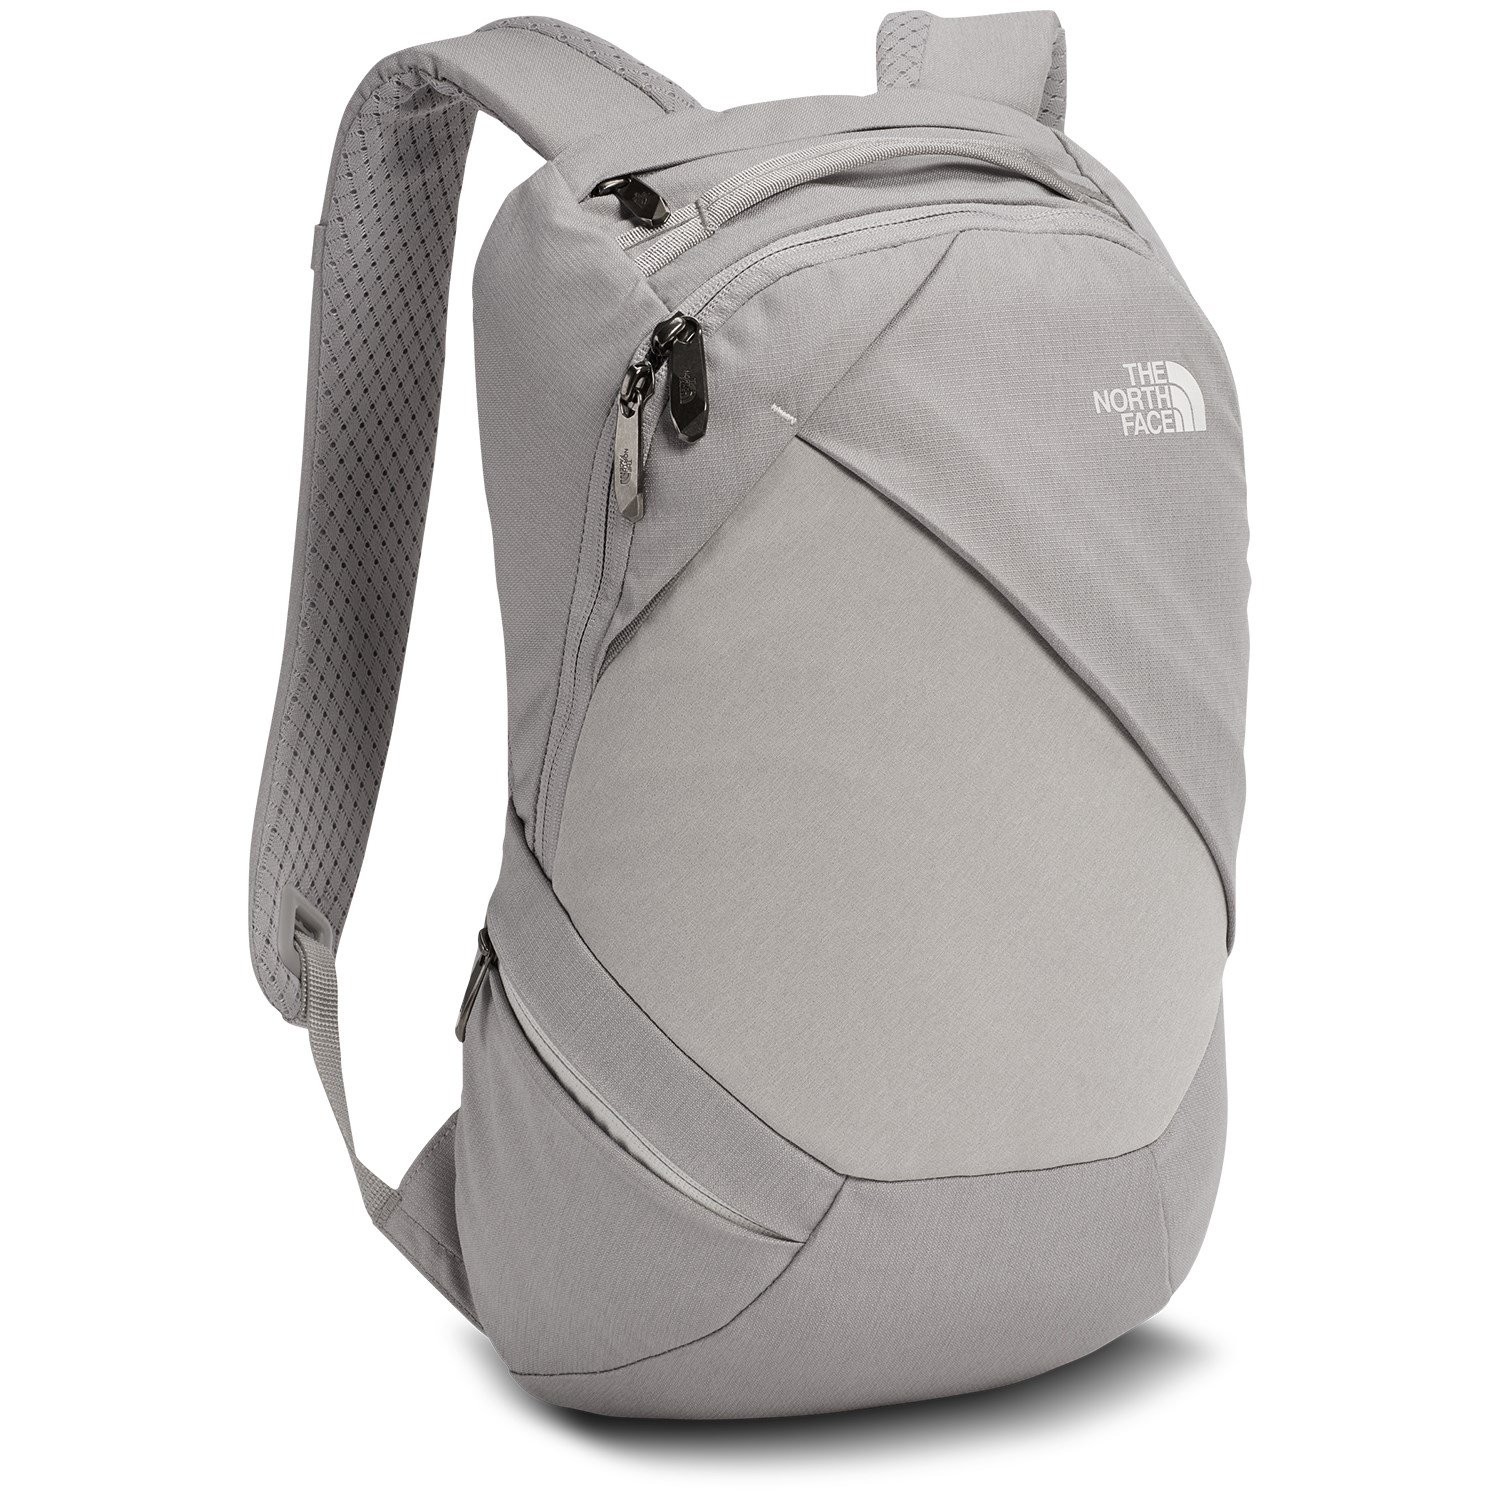 The North Face Electra Backpack - Women 